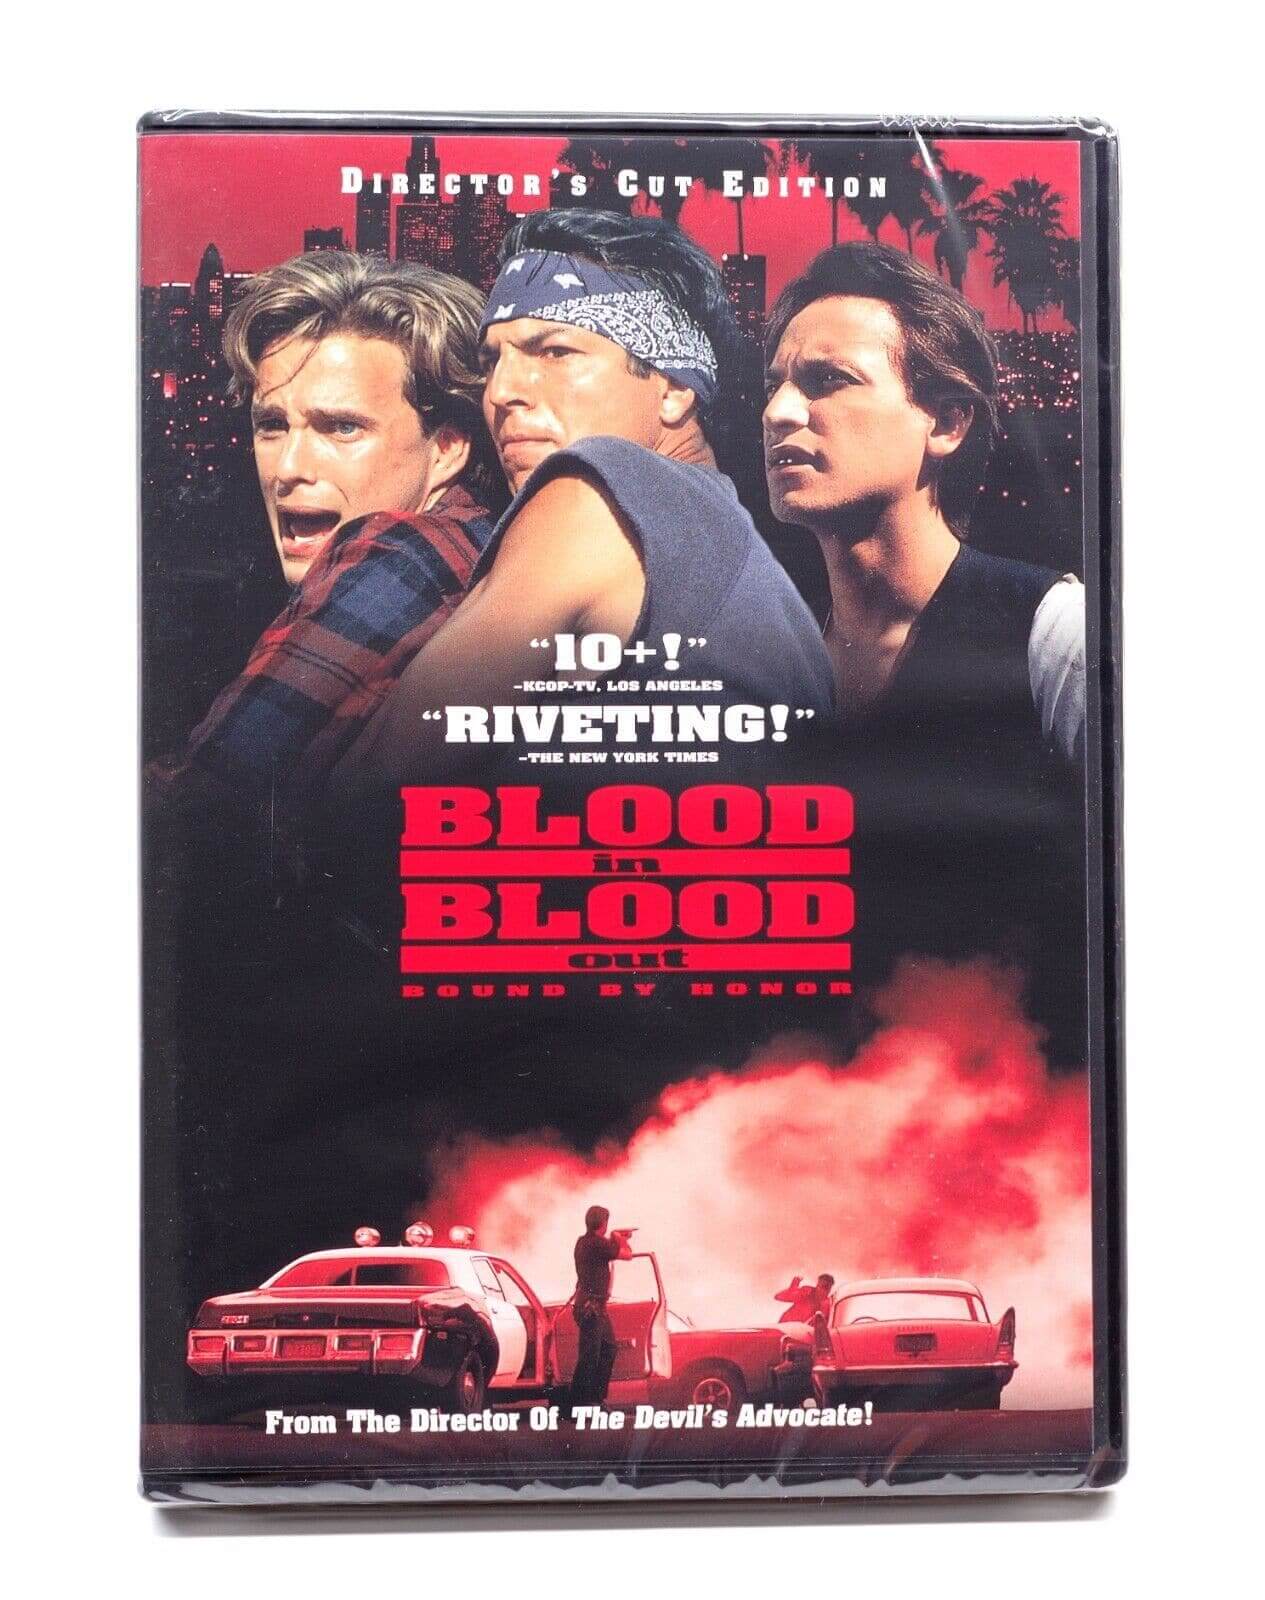 abi ham recommends full movie blood in blood out pic